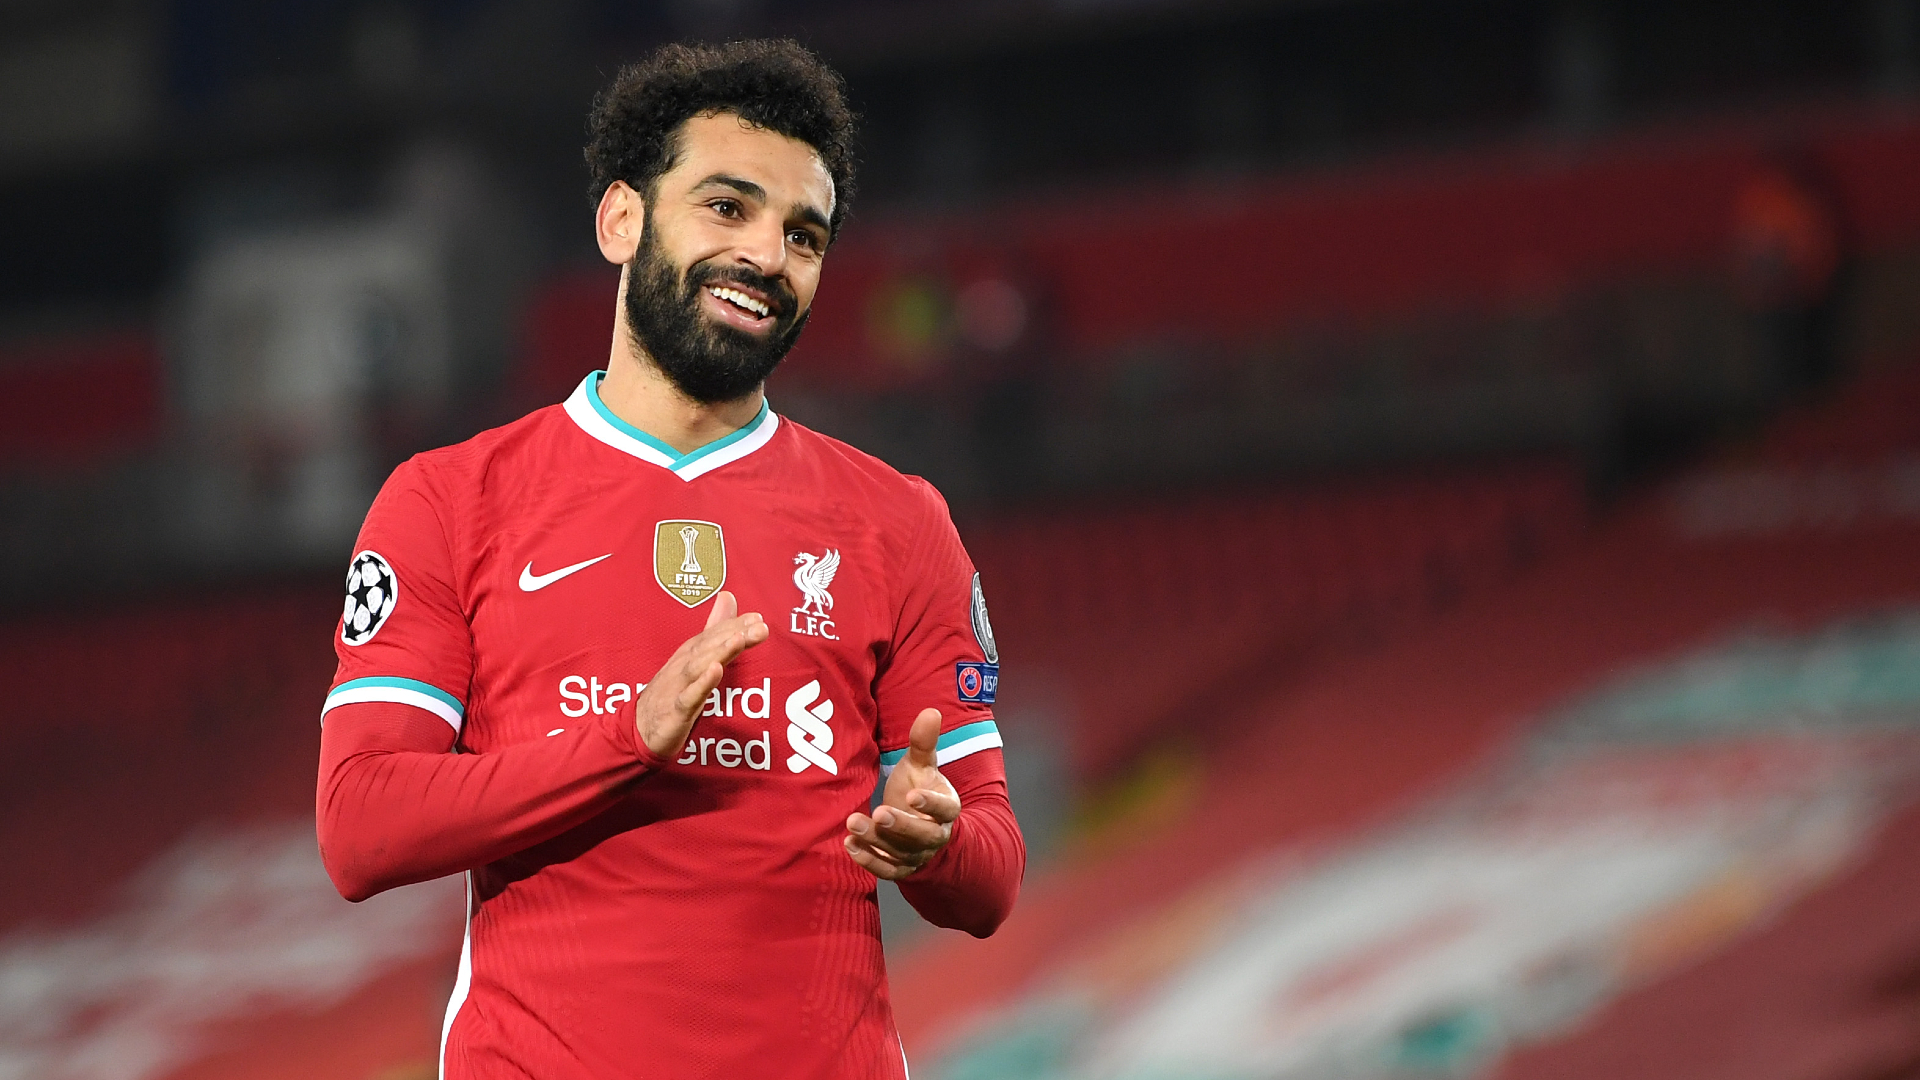 Video Mo Salah Liverpool's Scoring King Your Best Source For